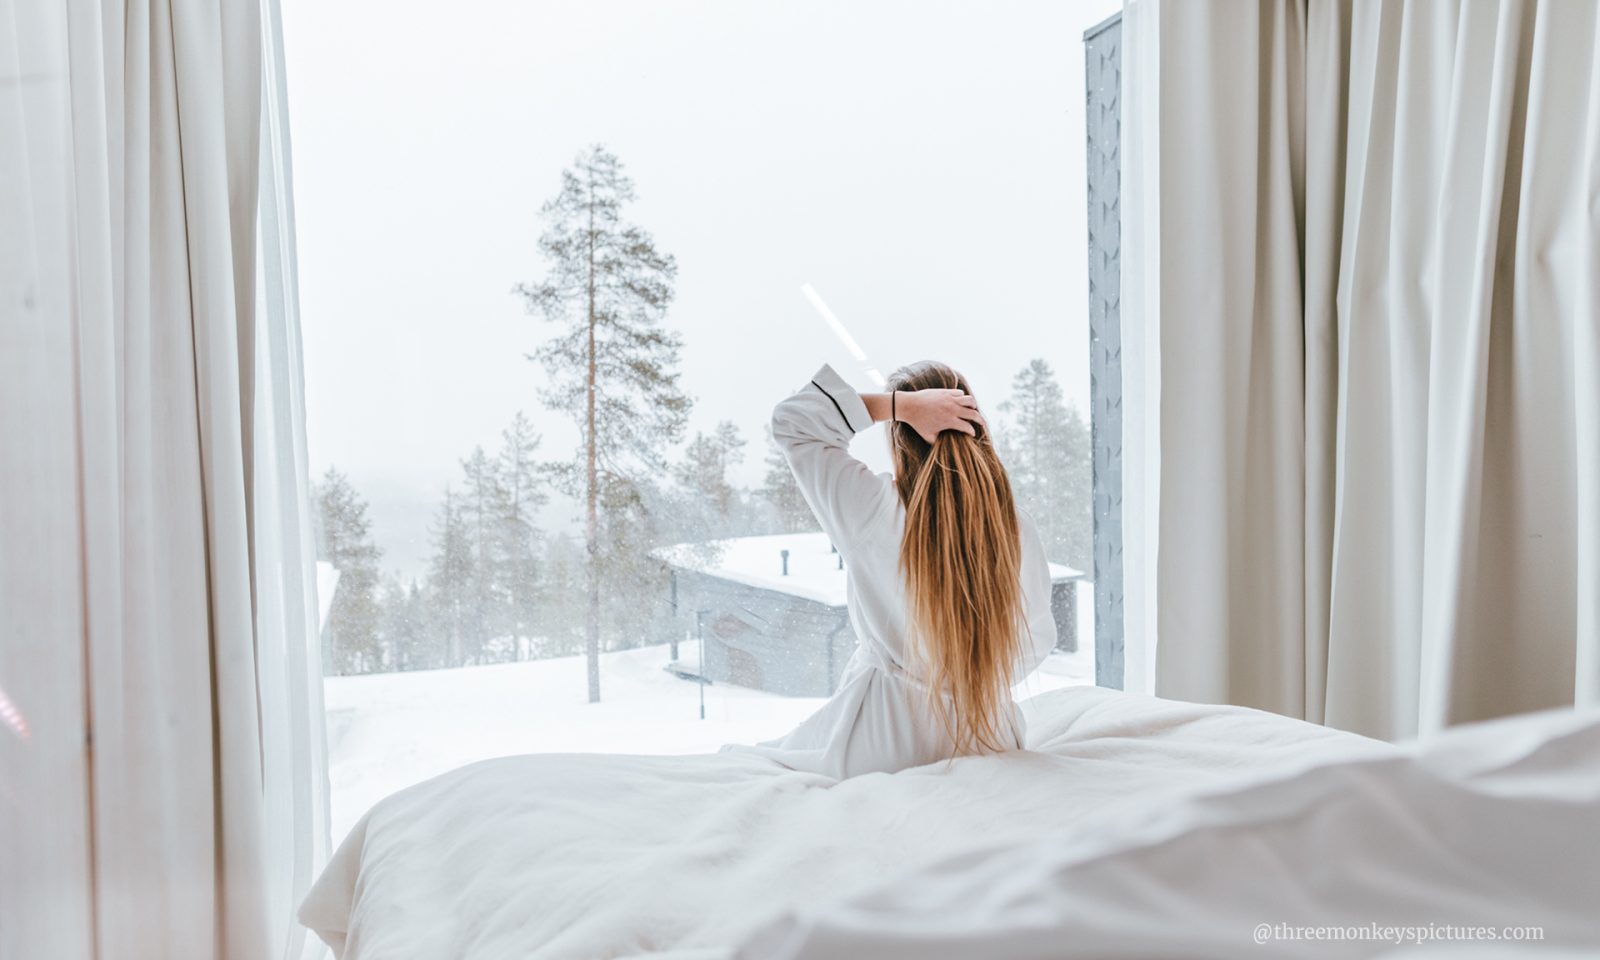 Woman gazing the snowy landscape from arctic scene executive suites.